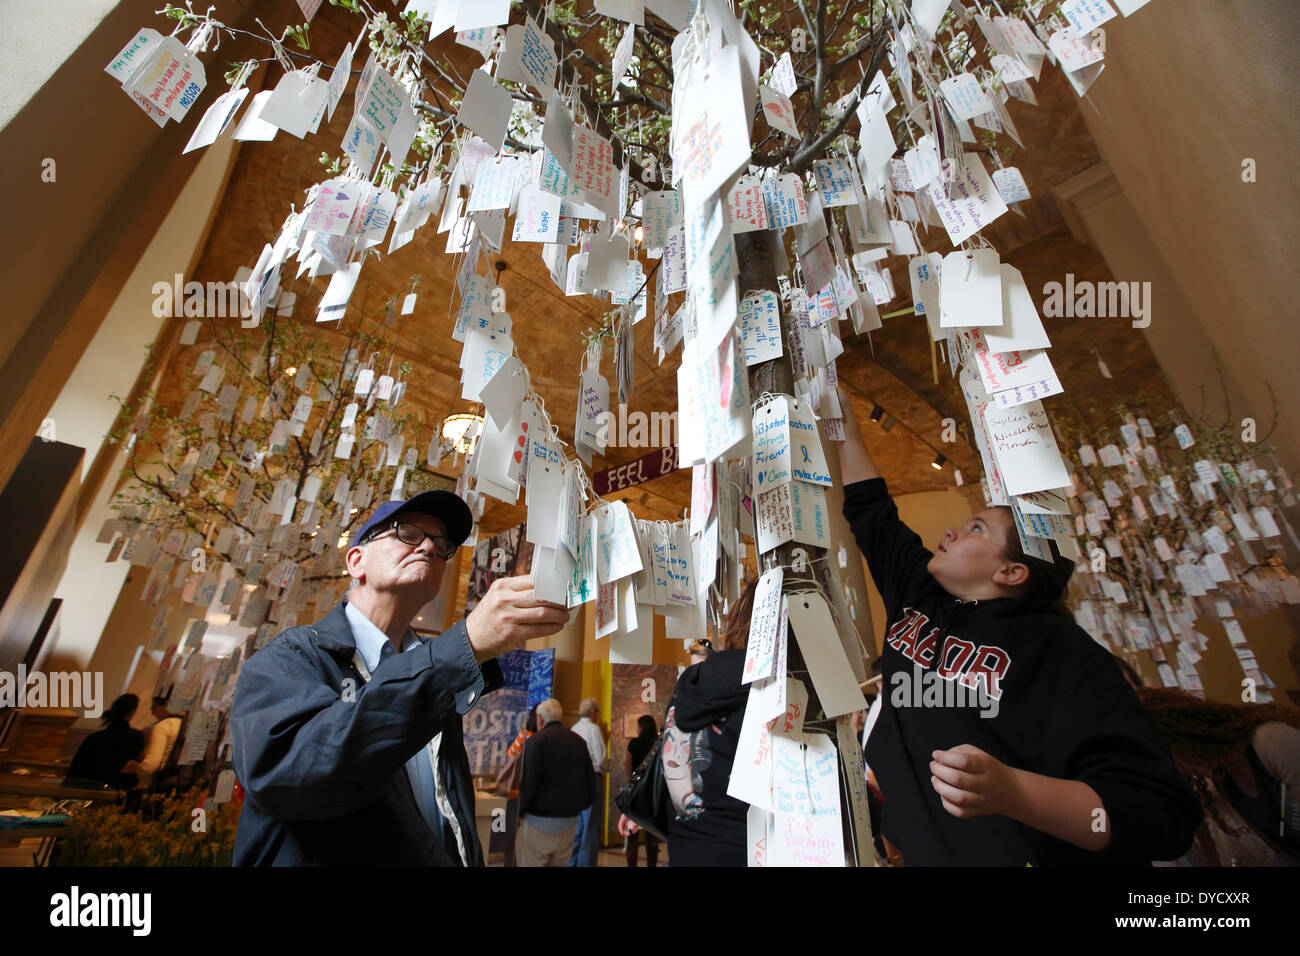 Boston, Massachusetts, USA, 14th April 2014. Visitors read personal messages left by visitors to the Boston Marathon Memorial exhibit in the Boston Public Library. Tuesday marks the one-year anniversary of the Boston Marathon bombings. Stock Photo